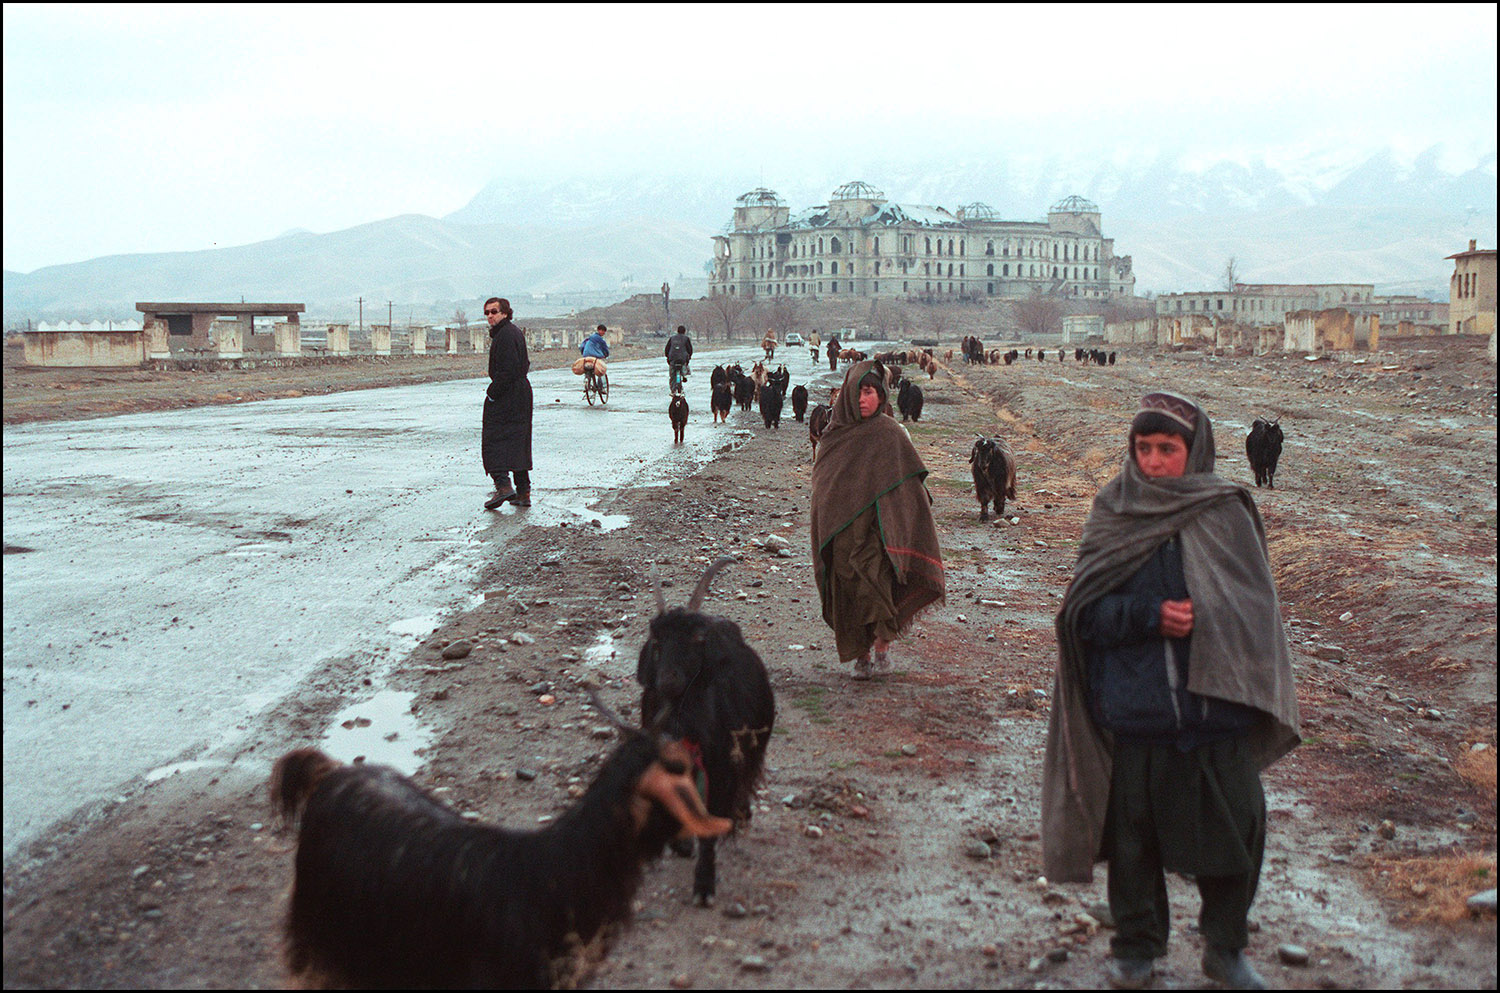 Bernard-Henri Lévy In Kabul, on the road leading to the Darulaman Palace.